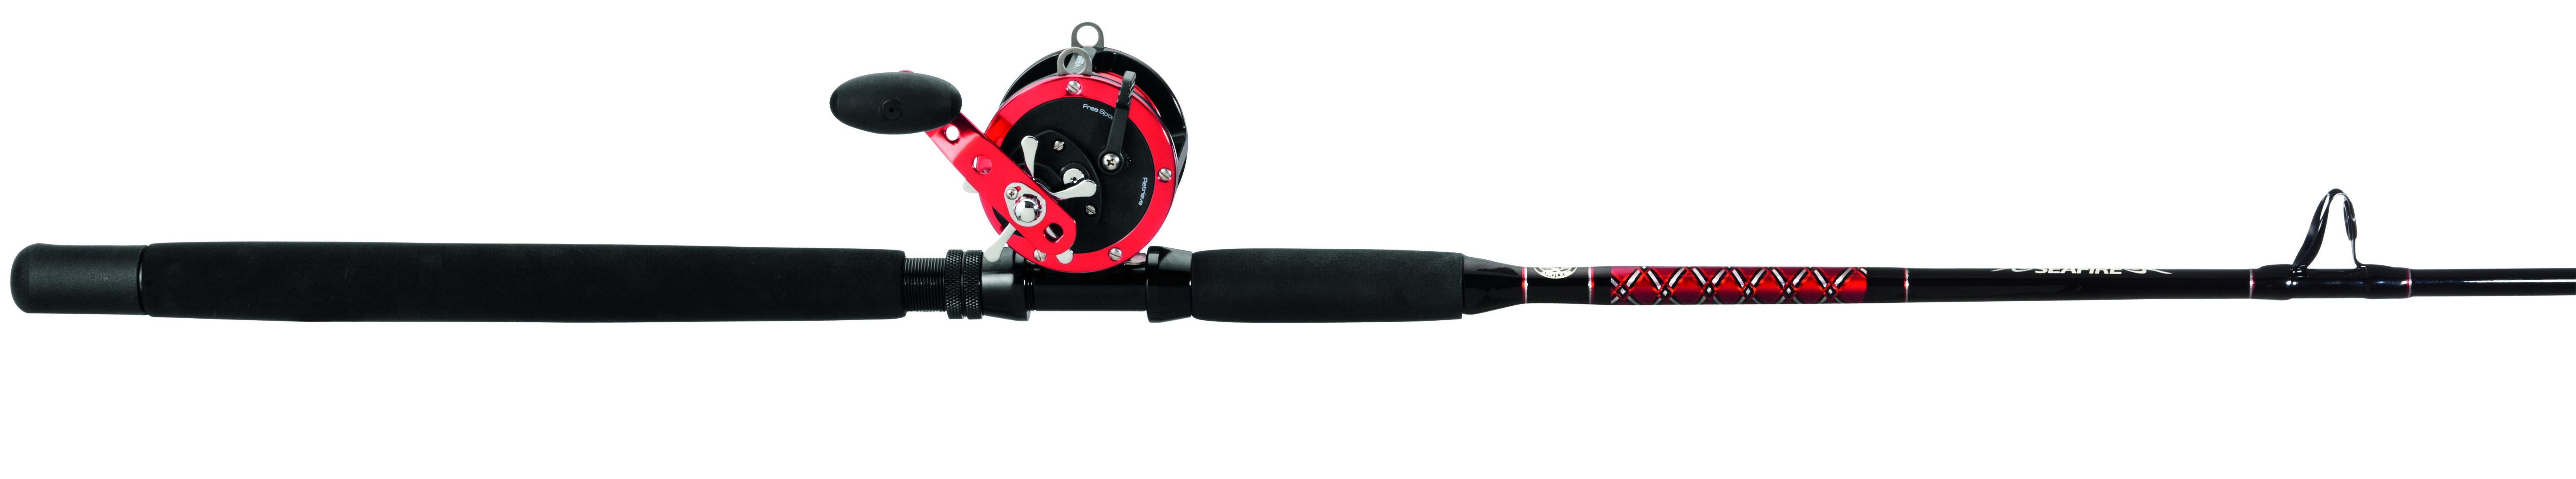 Offshore Angler Seafire Combo, ready to conquer any fish in the sea